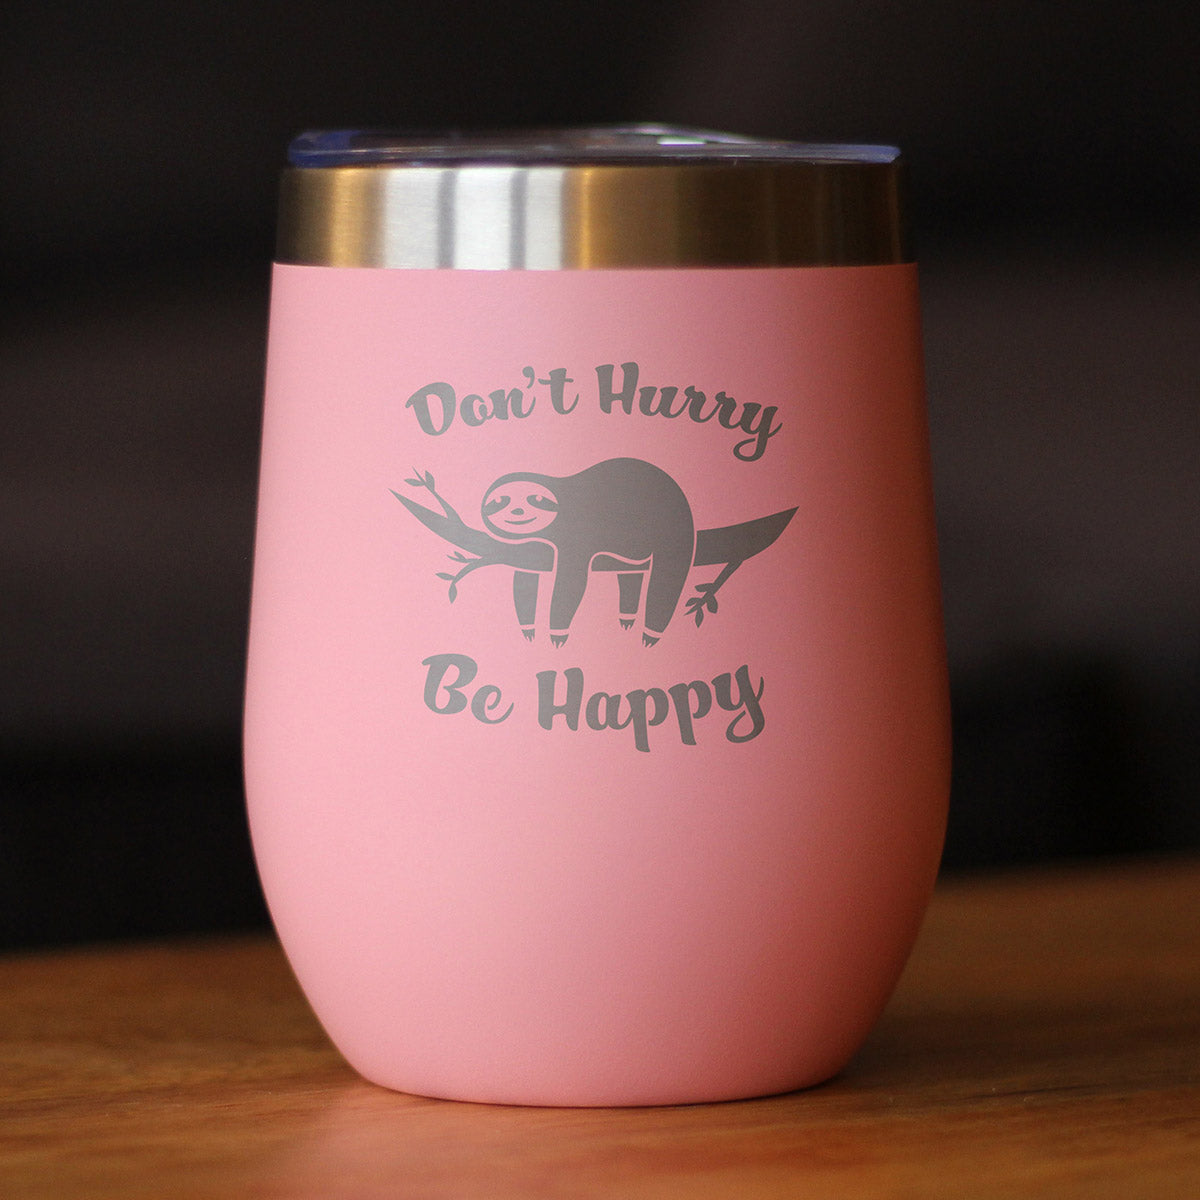 Don&#39;t Hurry Be Happy - Sloth Wine Tumbler with Sliding Lid - Stemless Stainless Steel Insulated Cup - Cute Funny Outdoor Camping Gift